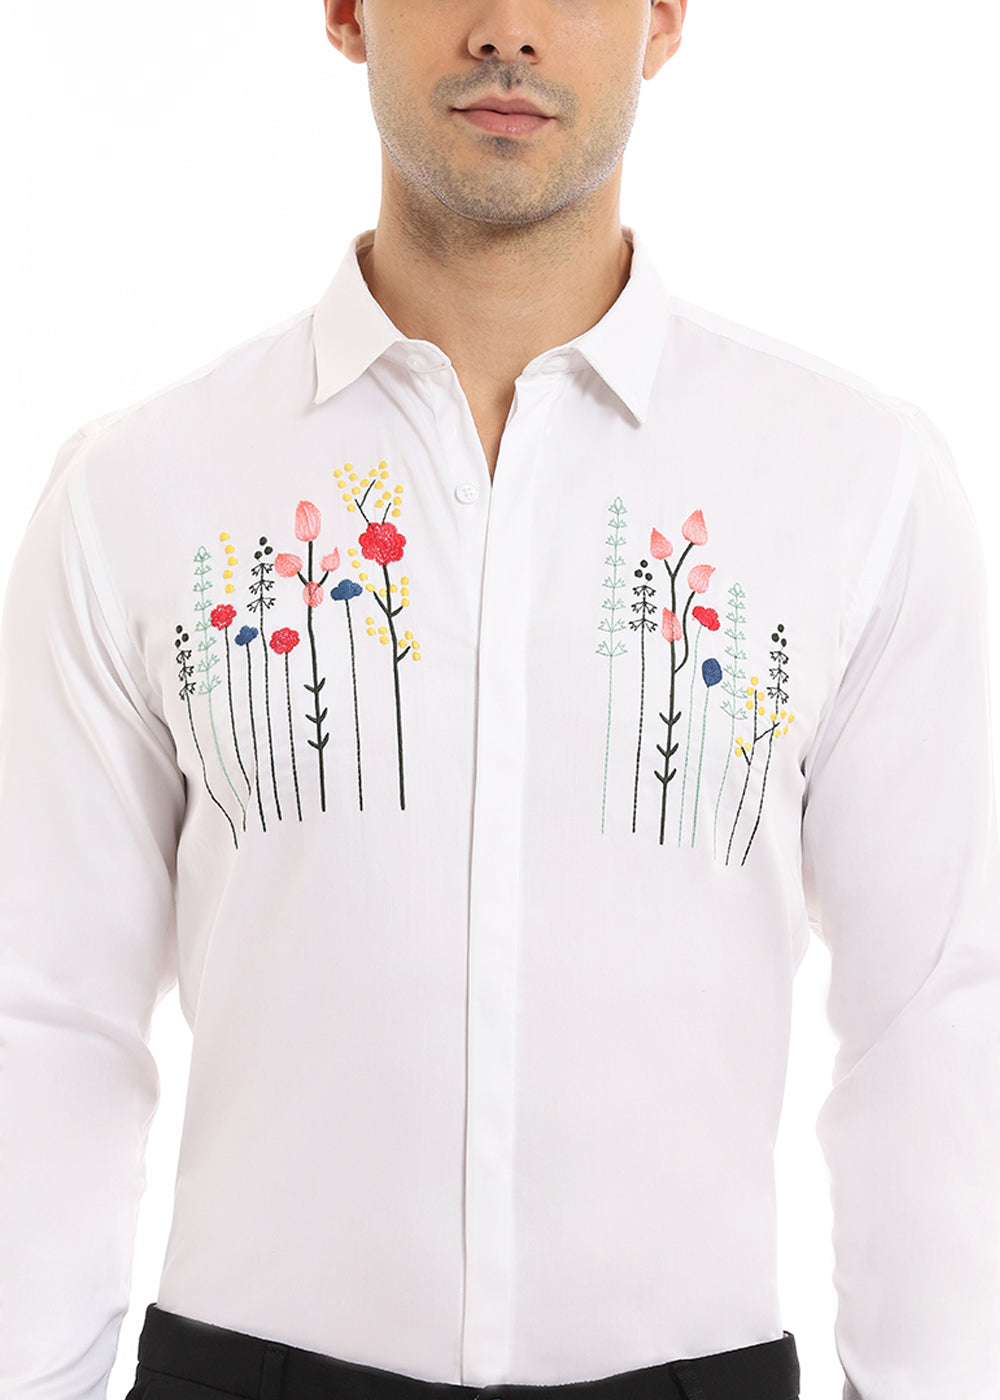 Get Floral Artistry White Shirt